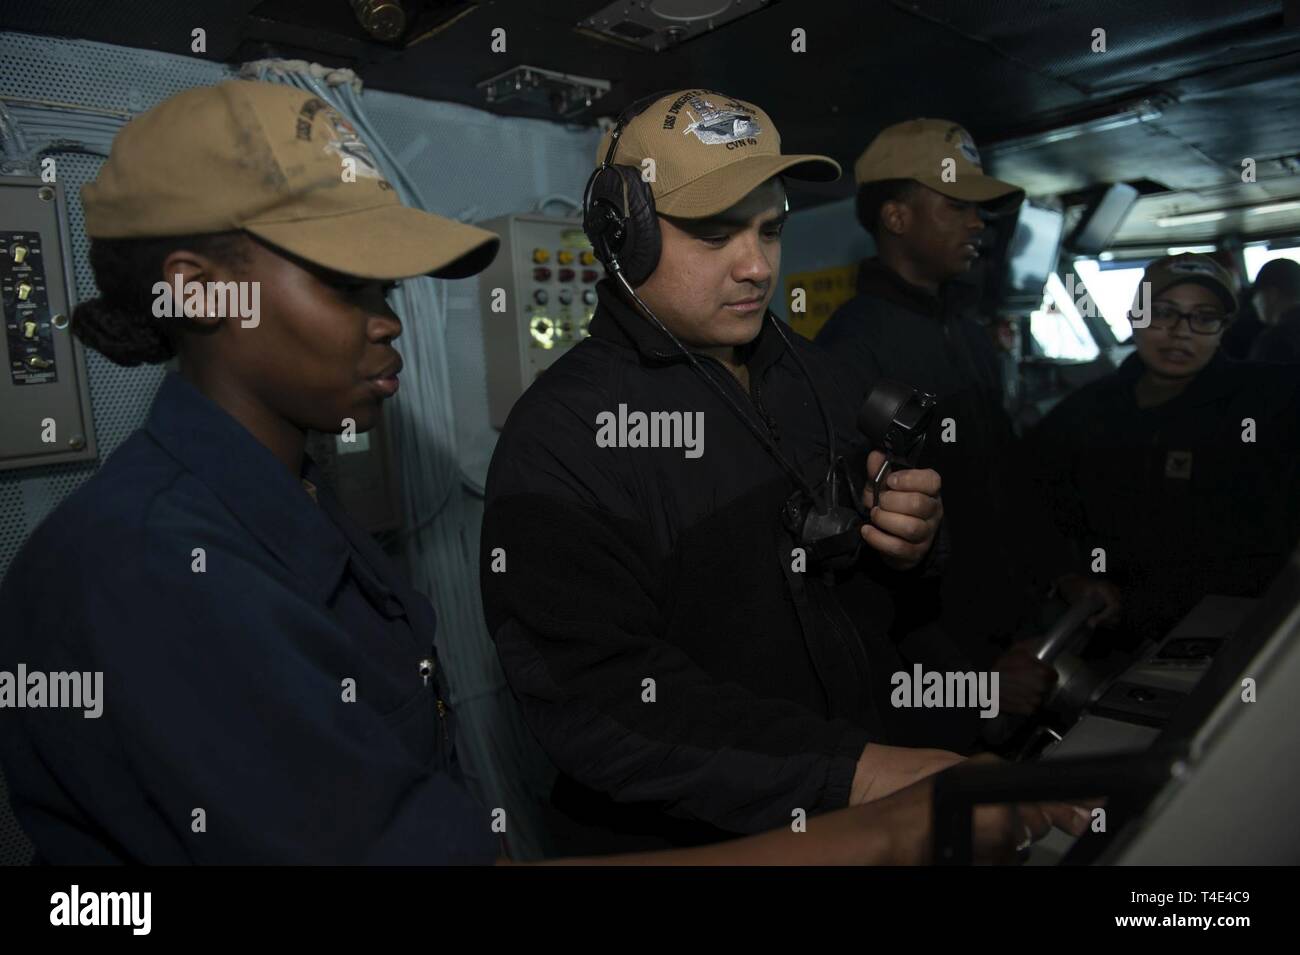 ATLANTIC OCEAN (March 29, 2019) Boatswain's Mate Seaman Elenoir Kosgei, left, from Greensborough, N.C., trains Seaman Jonathan Gancaycos, from Oakland Calif., on manning the helm on the bridge aboard the aircraft carrier USS Dwight D. Eisenhower (CVN 69). Ike is underway conducting sea trials during the final portion of a Planned Incremental Availability (PIA) as part of the maintenance phase of the Optimized Fleet Response Plan (OFRP). Stock Photo